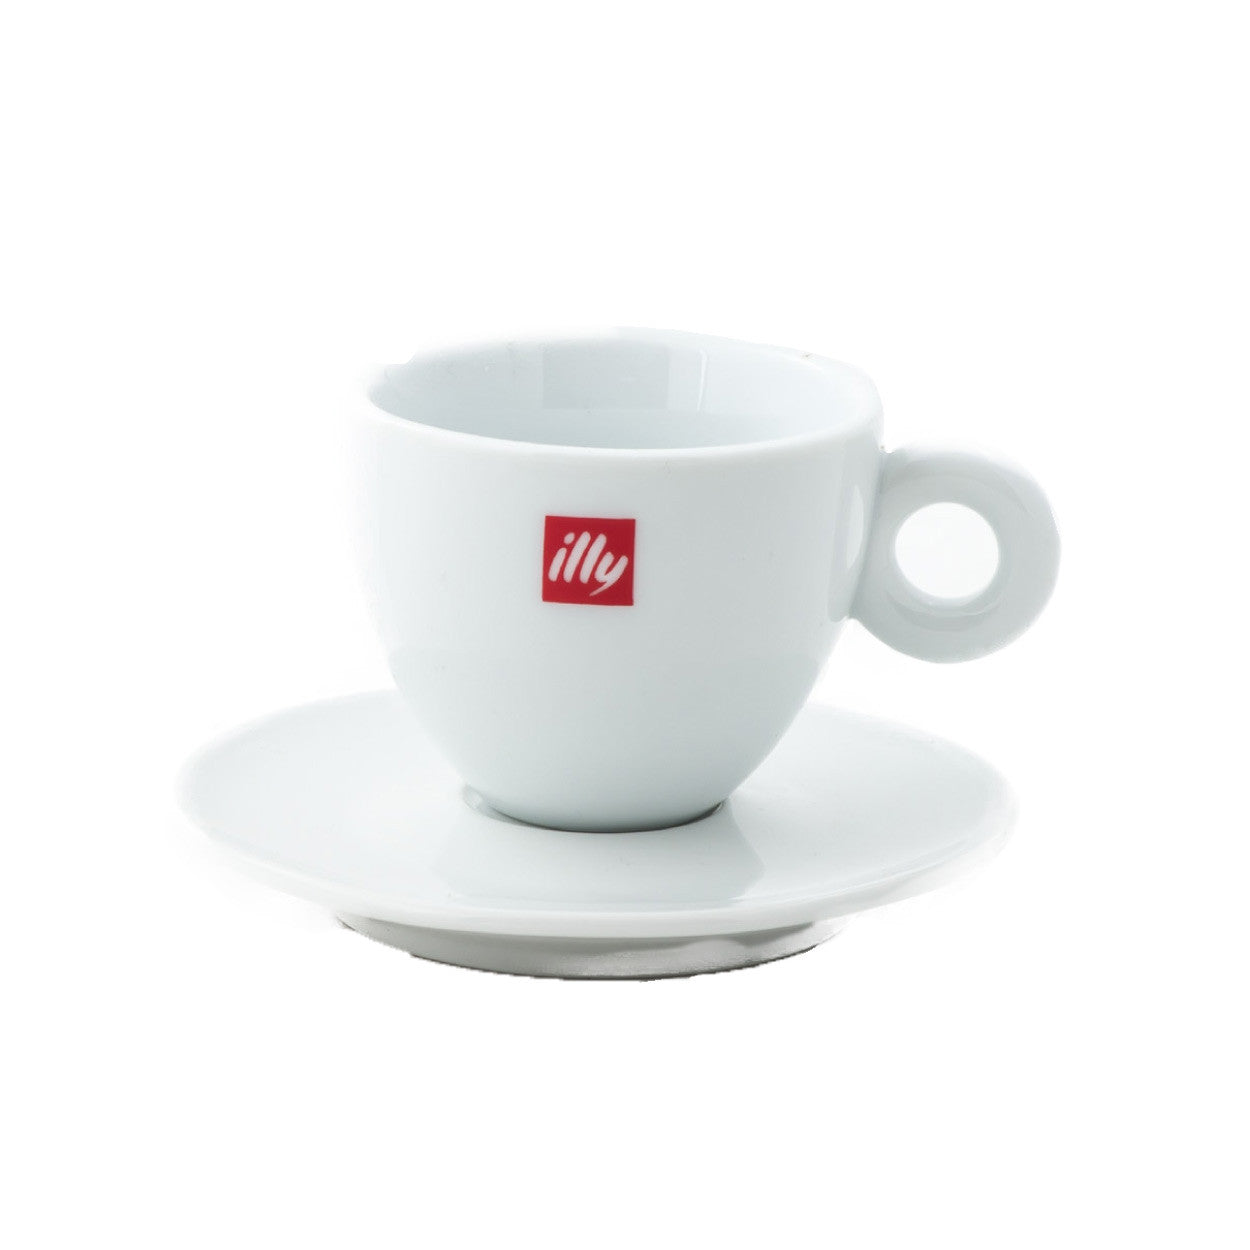 Illy Cappuccino Cups & Saucers Home Coffee Solutions